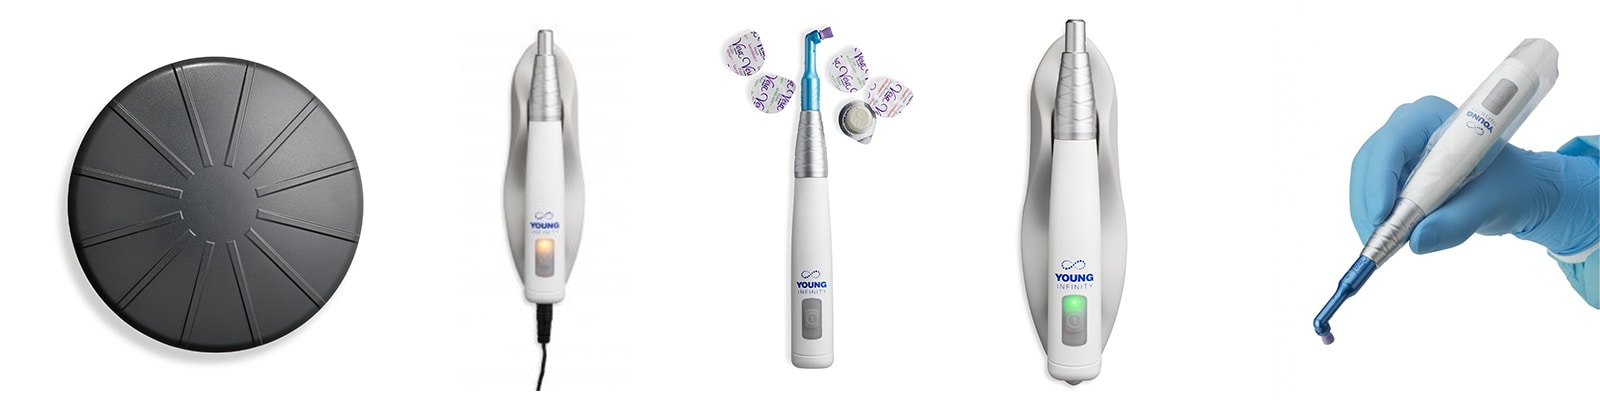 Young™ Infinity Cordless Hygiene Handpiece